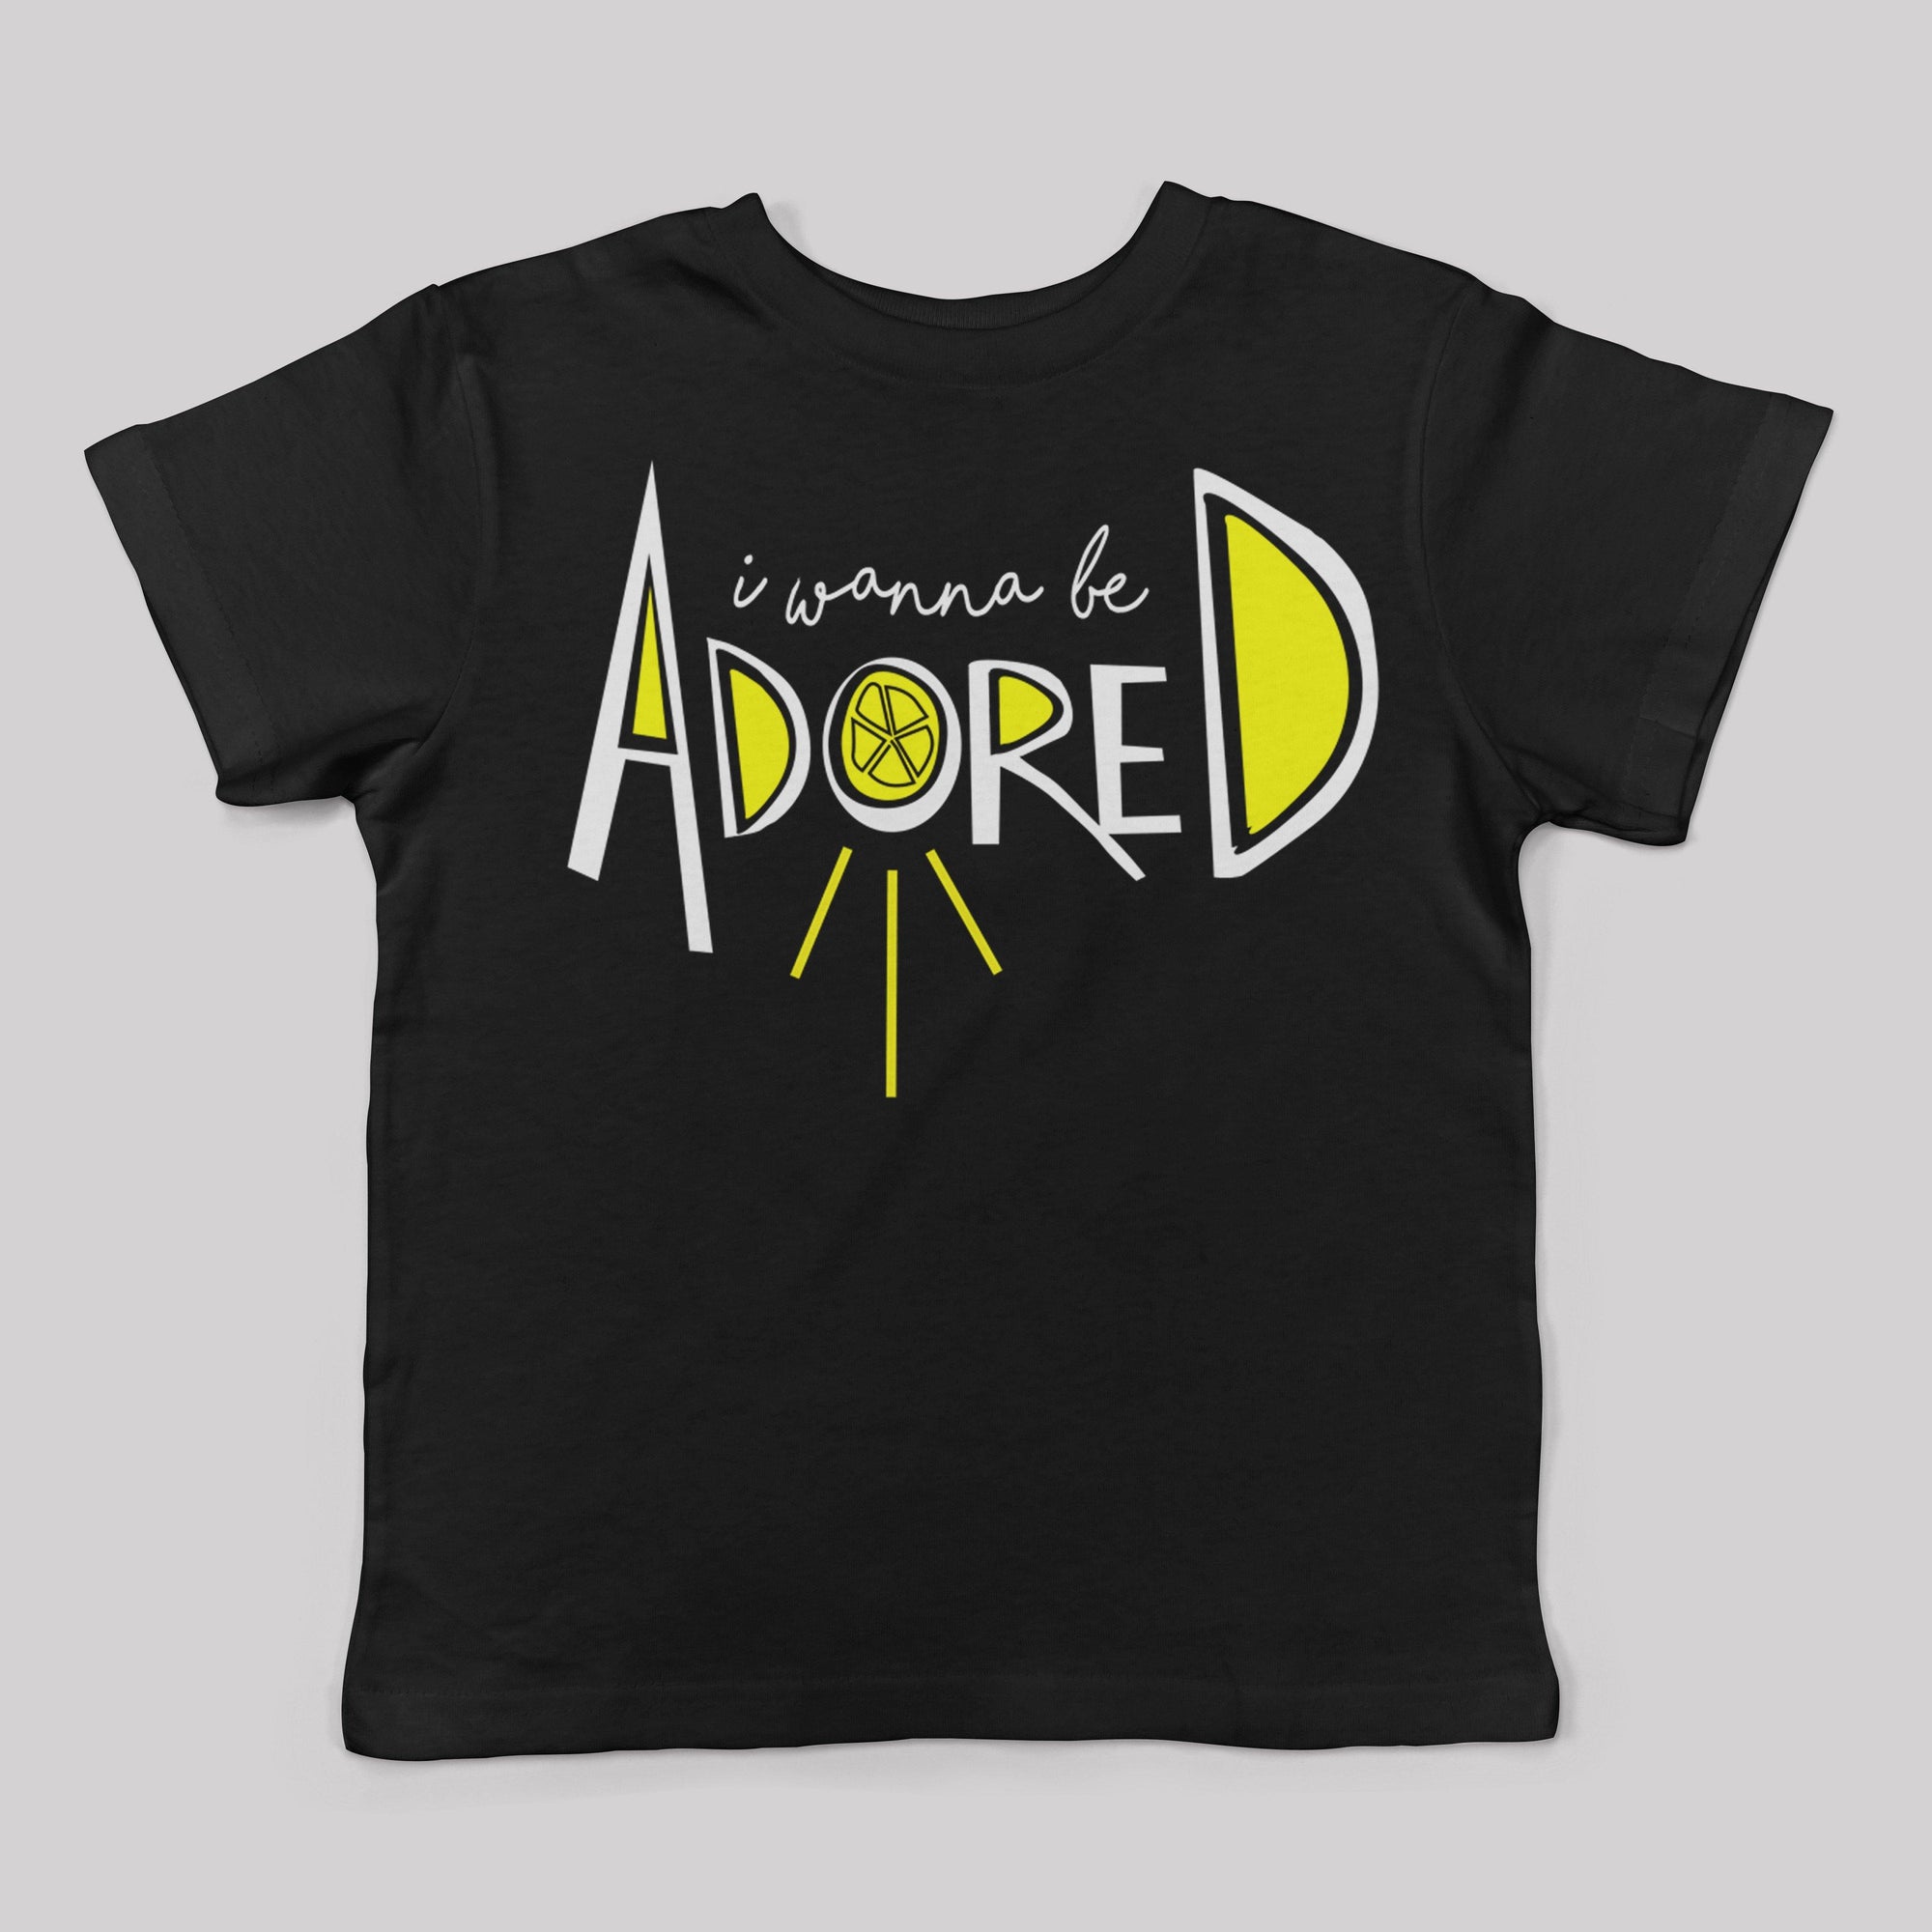 "I Wanna Be Adored" The Stone Roses Inspired Kids Tee - Baby Teith